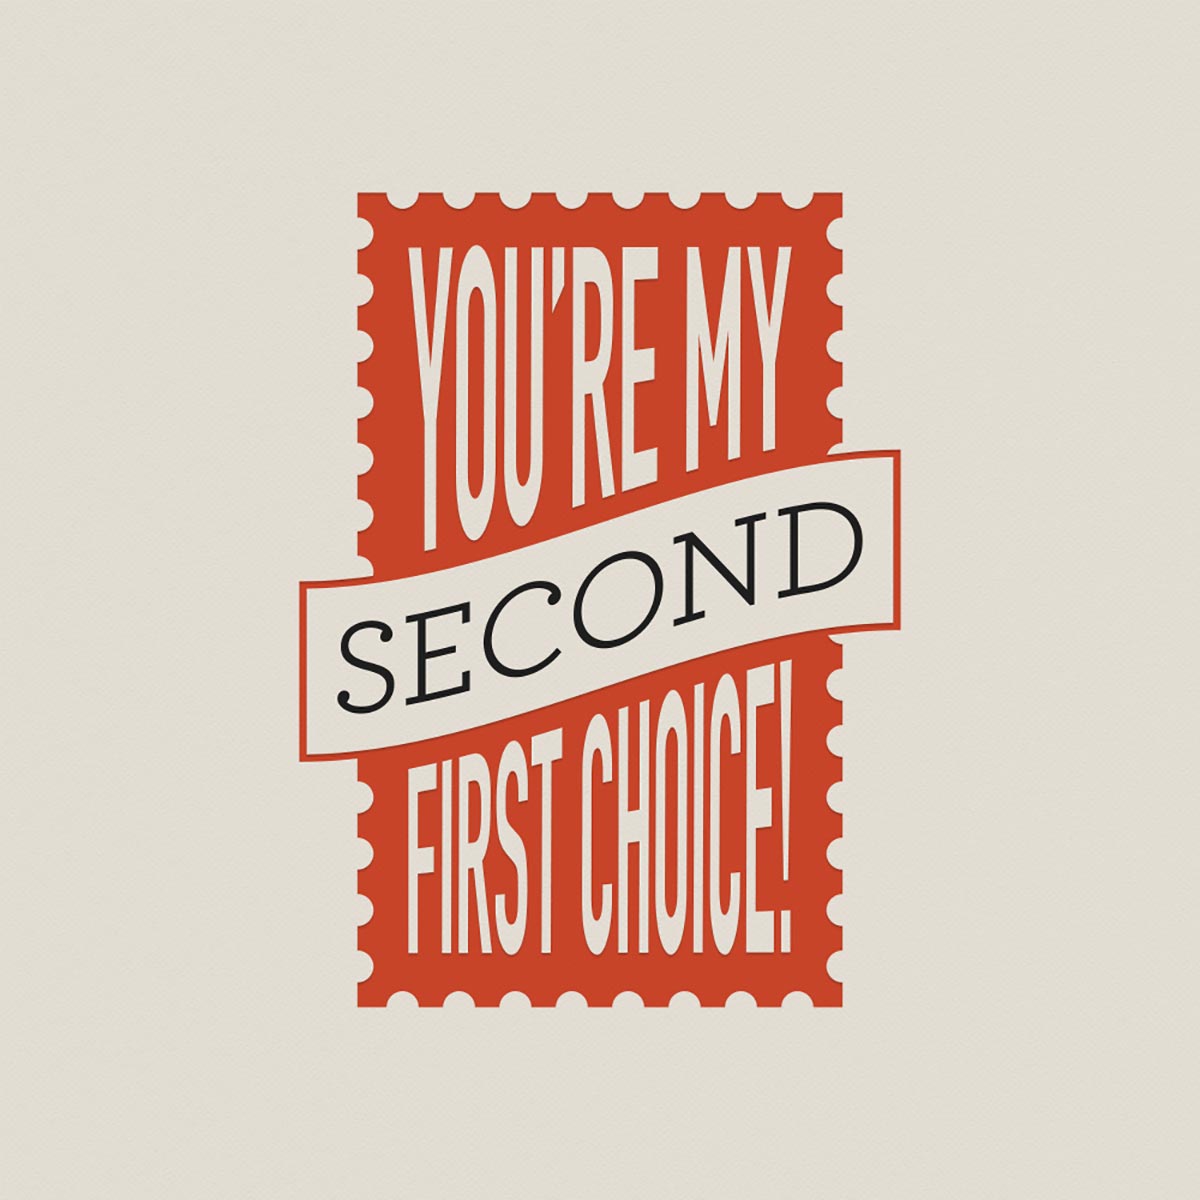 secondfirstchoice